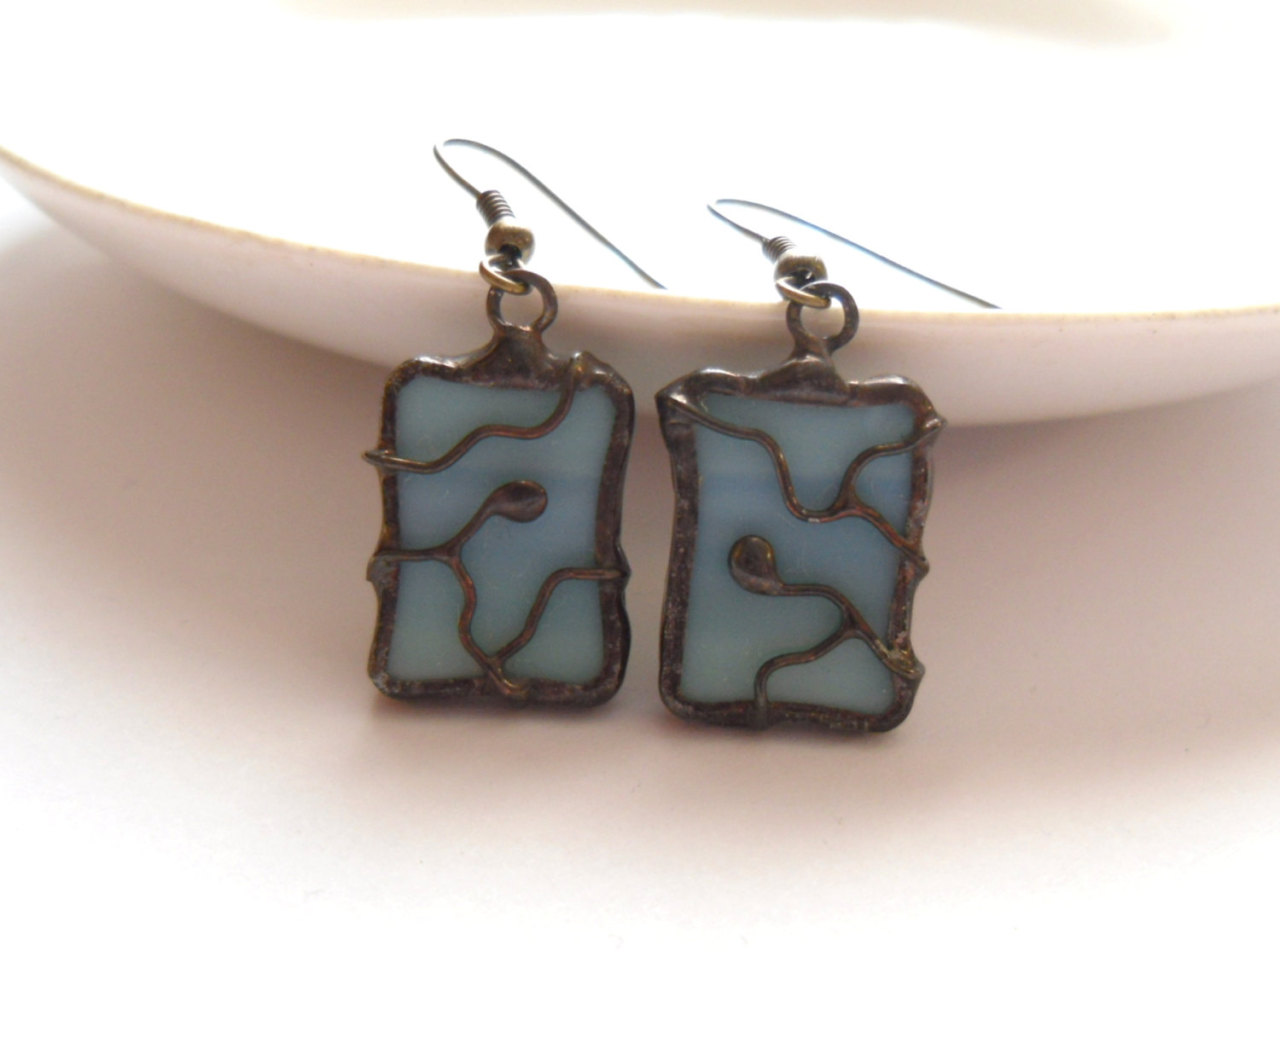 artemisfantasy: Stained glass earrings, copper...